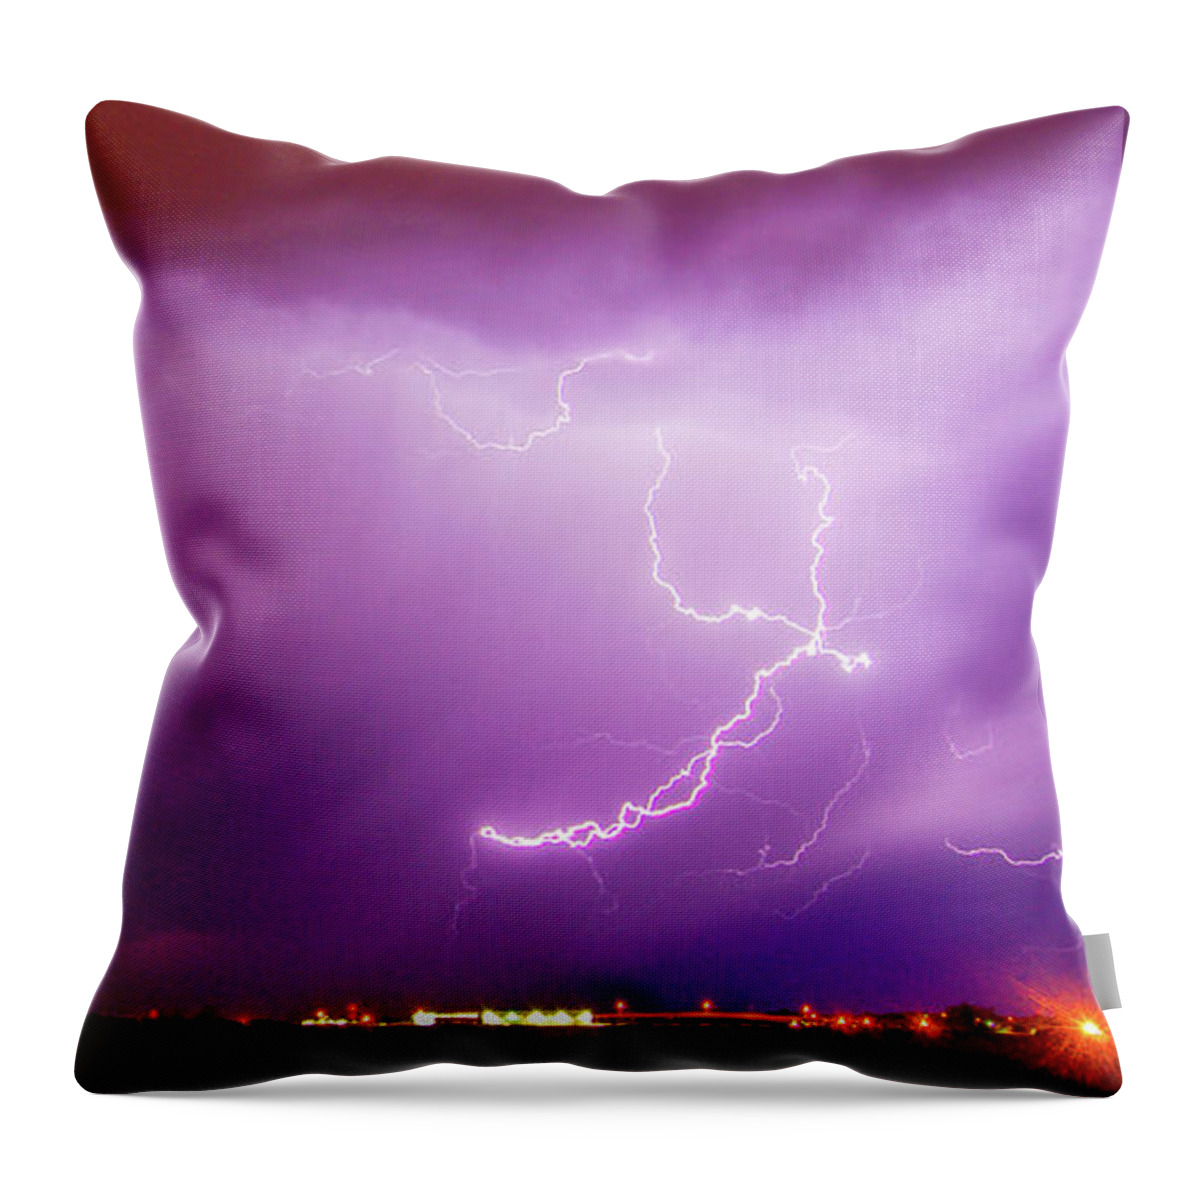 Nebraskasc Throw Pillow featuring the photograph Nasty But Awesome Late Night Lightning 007 by NebraskaSC